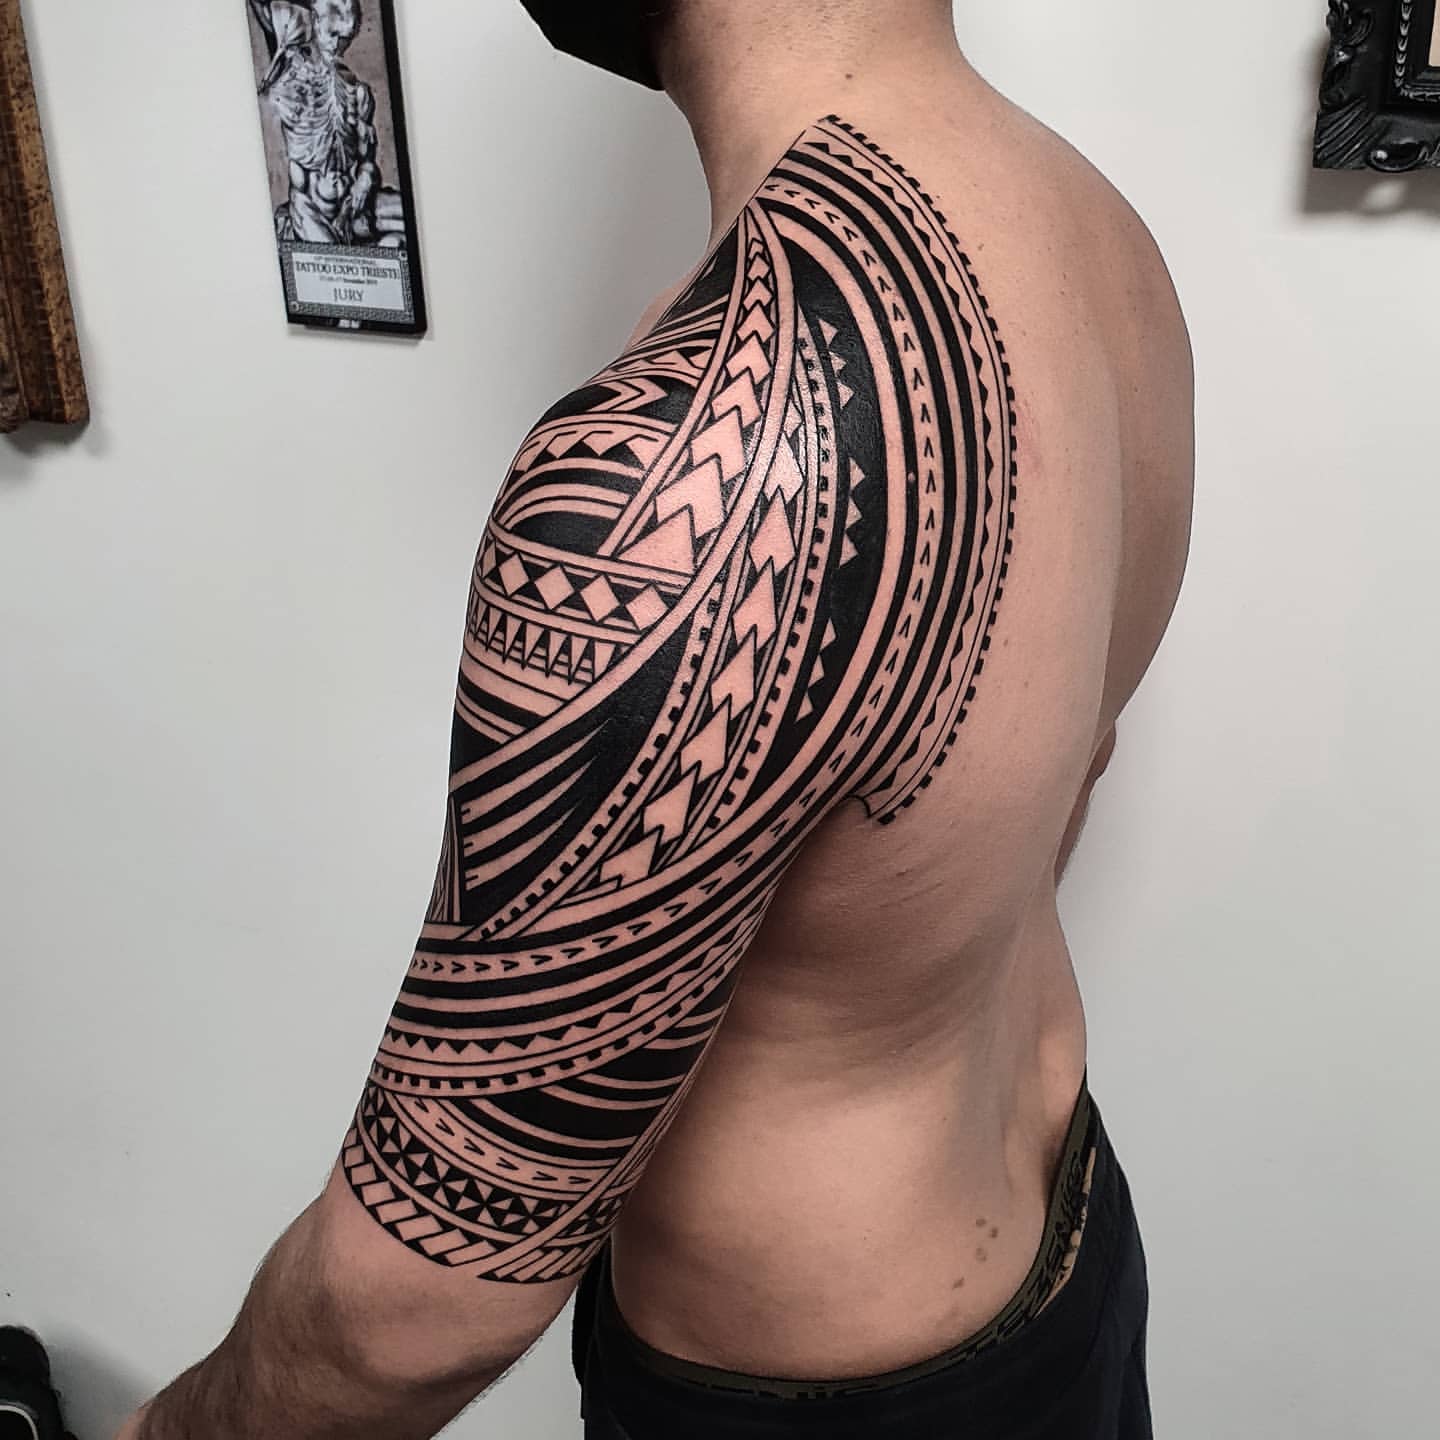 Amazon.com : SOOVSY 70 Sheets Temporary Tattoos Adults, Forearm Half Sleeve  Tattoos for Men, Lion Black 3D Realistic Tattoos Stickers Flower Animals,  Boys Tattoos Temporary for Women with Snake Eagle : Beauty